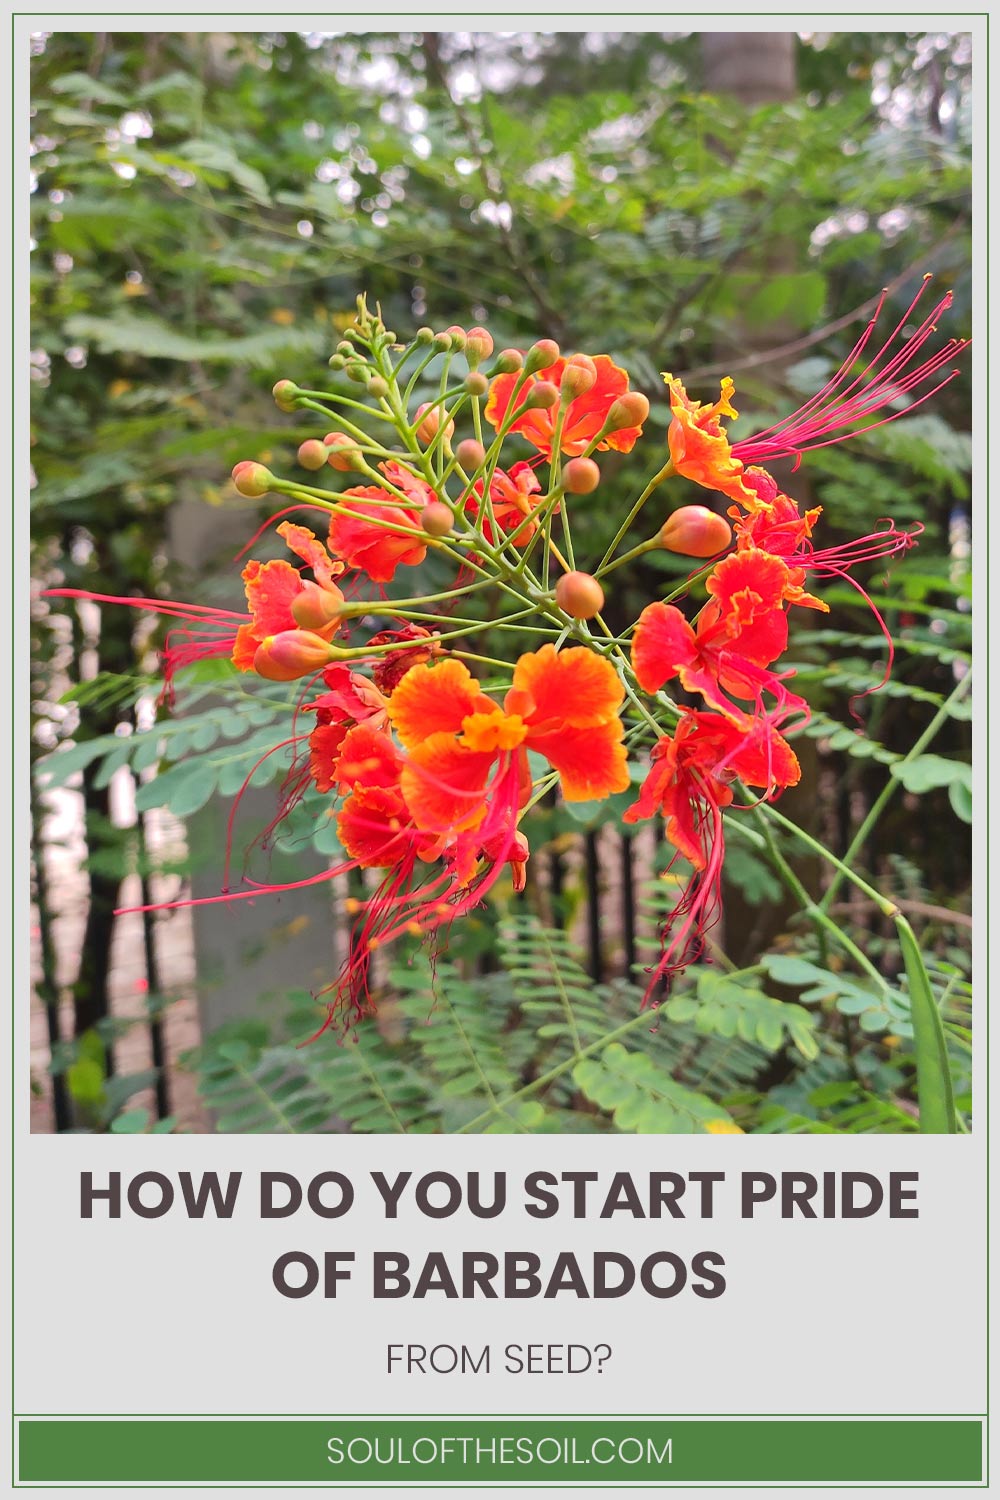 How Do You Start Pride of Barbados From Seed?